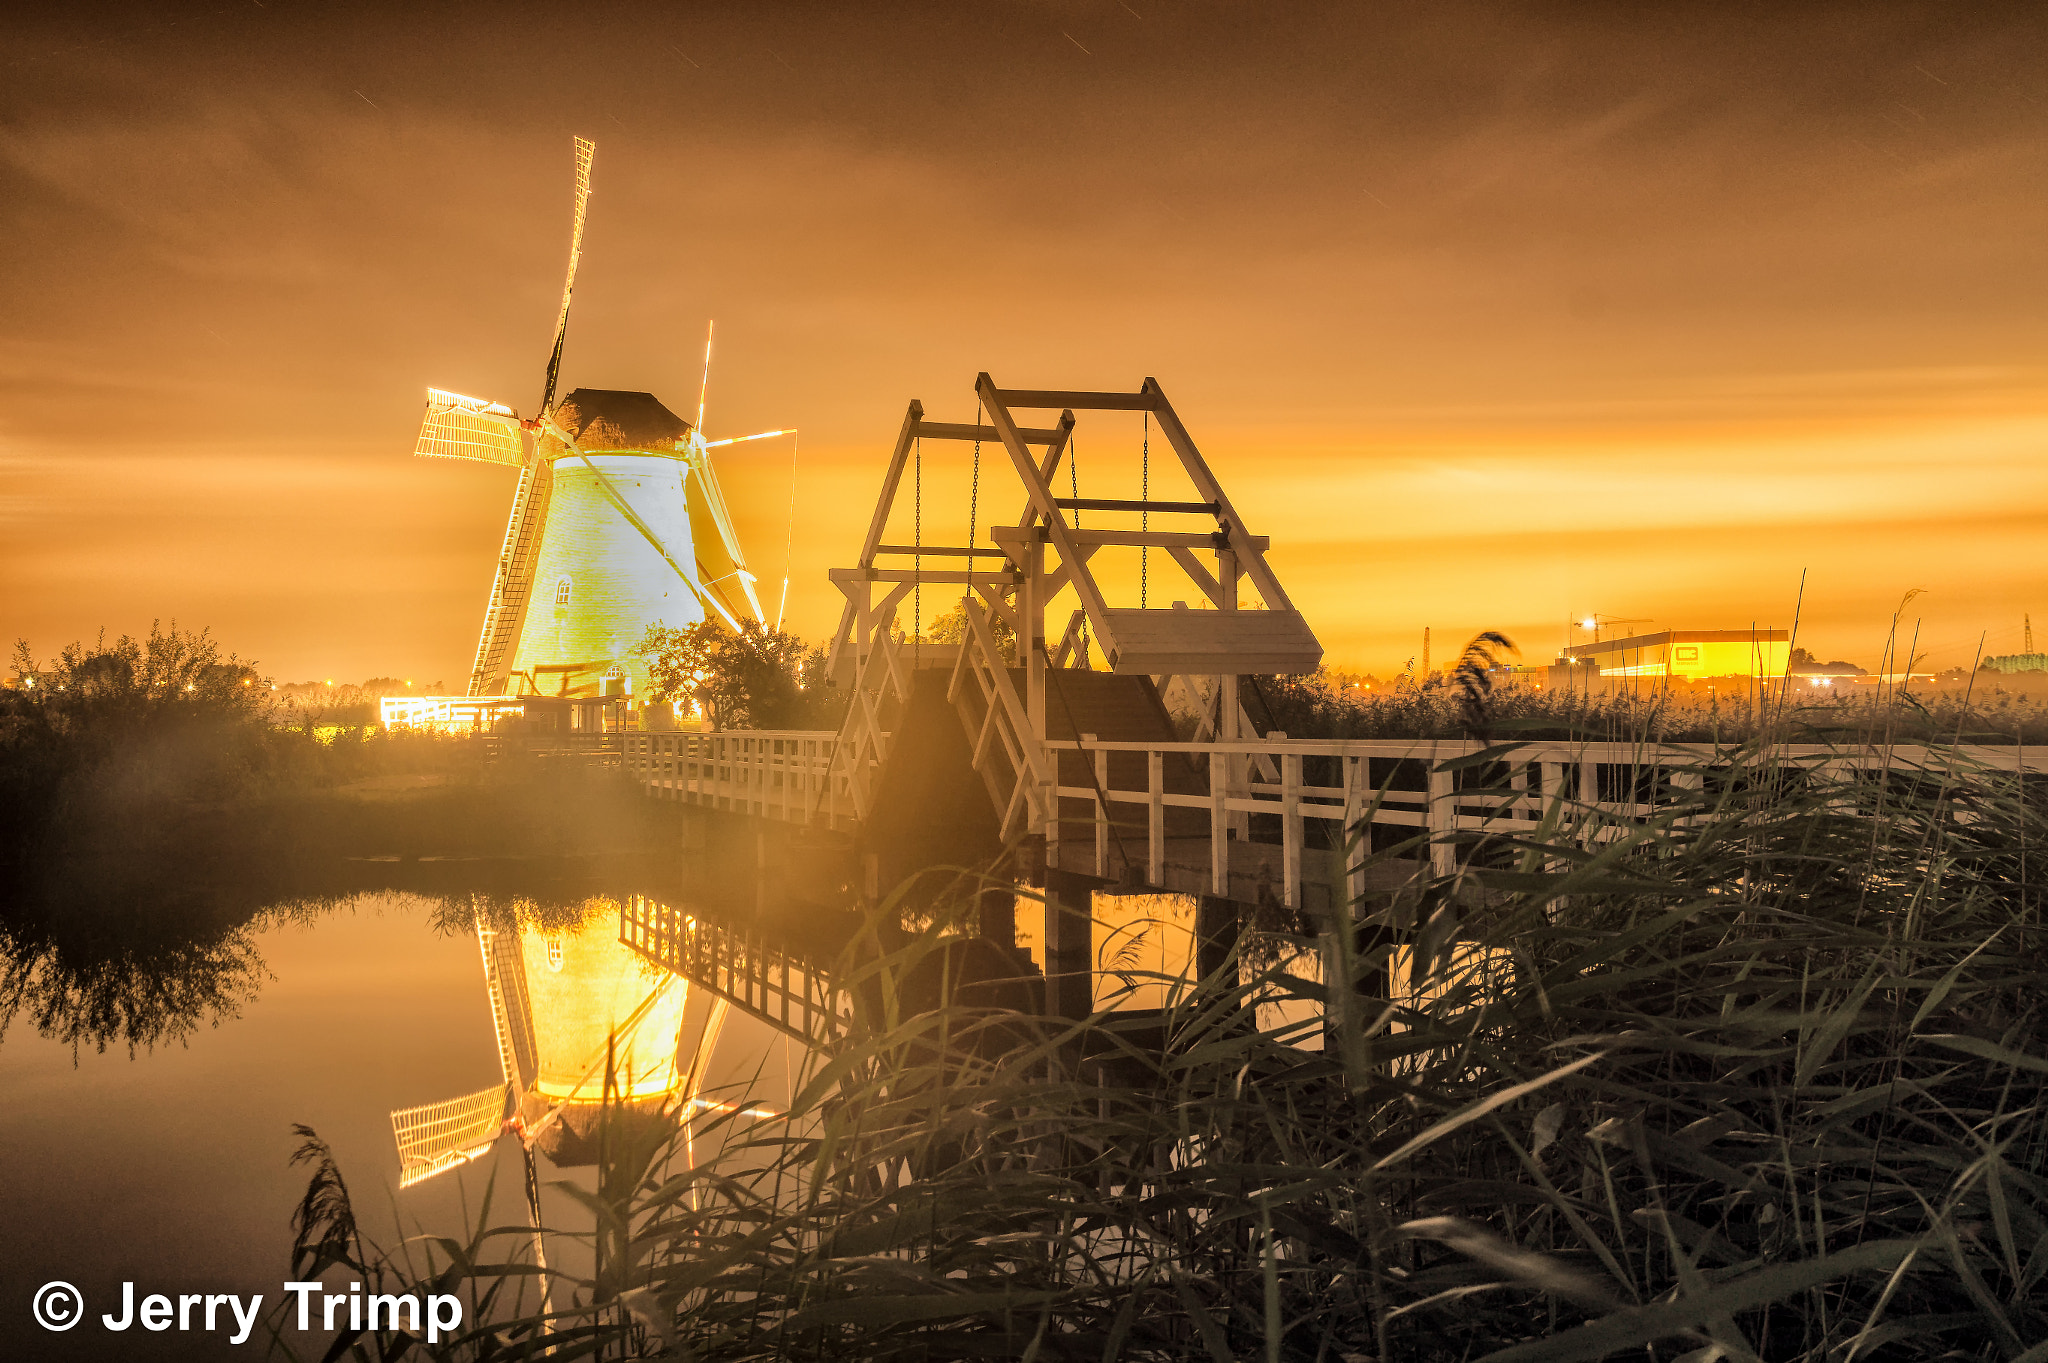 Sony SLT-A58 sample photo. Dutch heritage during golden hour photography